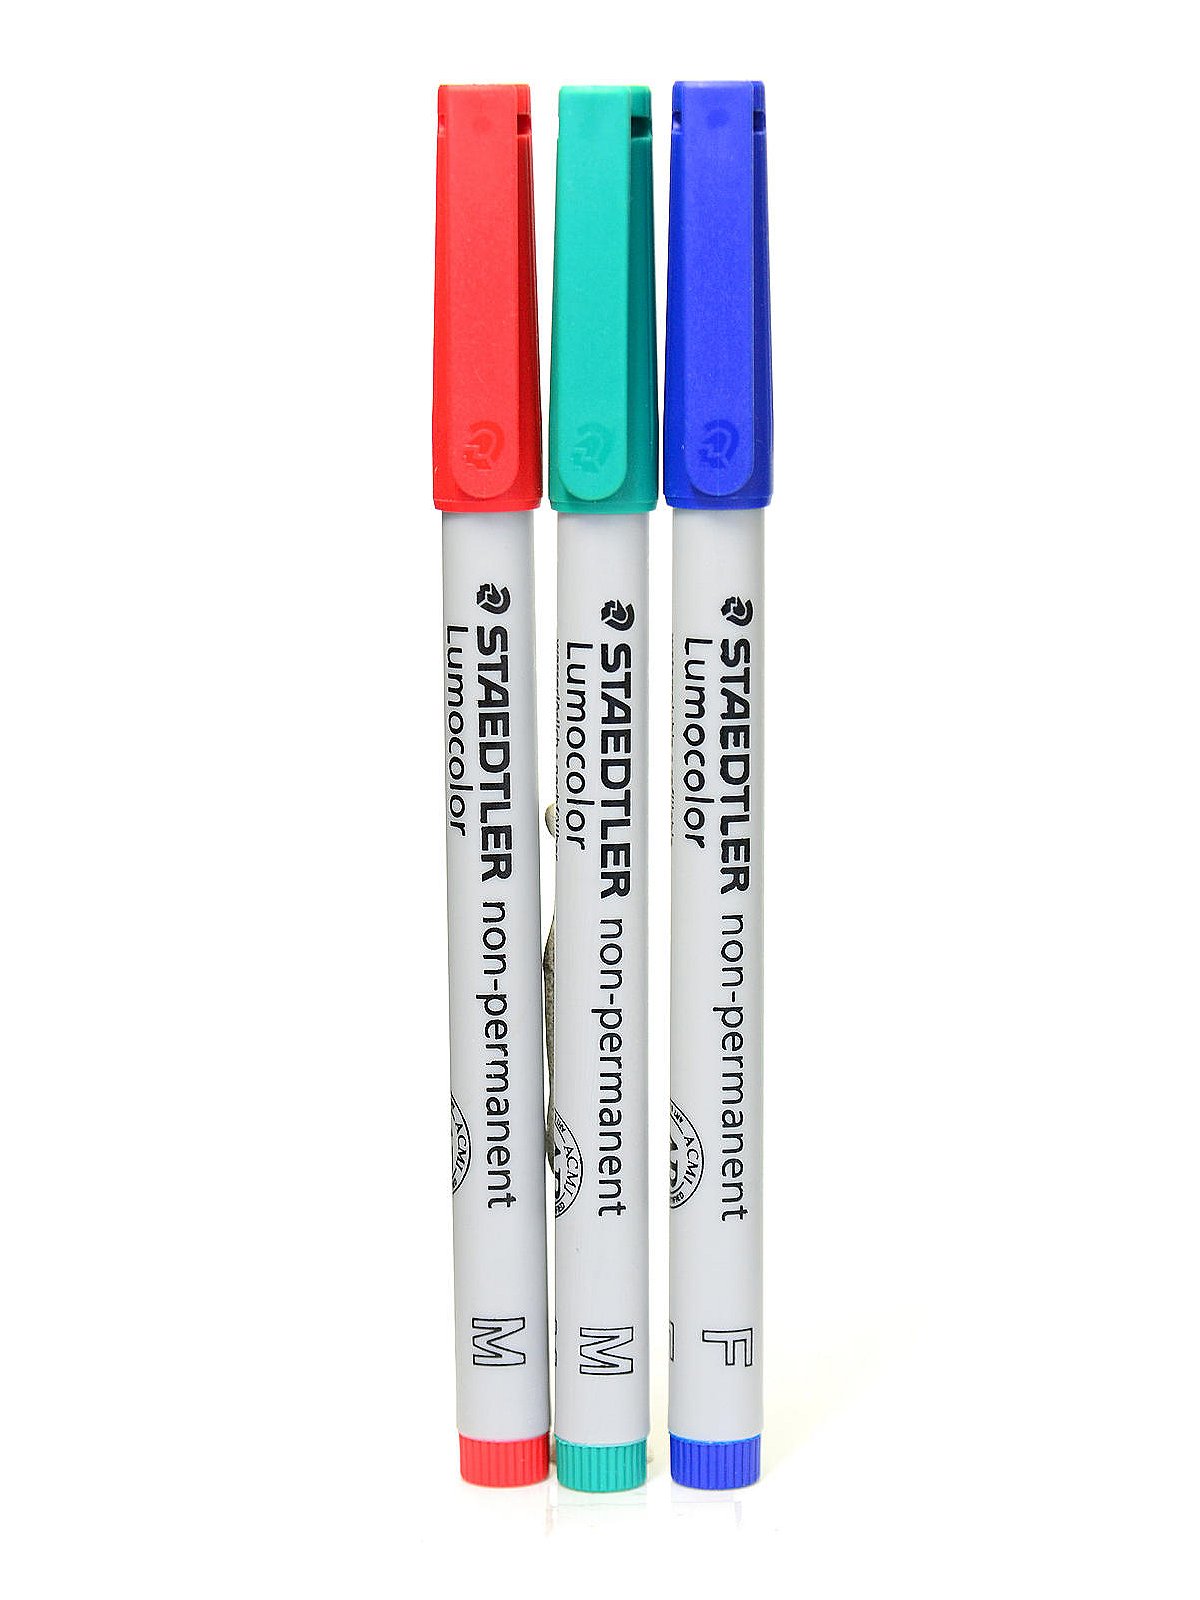 Reaeon Permanent Markers, 30 Colored Fine Point Permanent Marker Pens,  Works On Paper, Glass, Metal, Ceramics